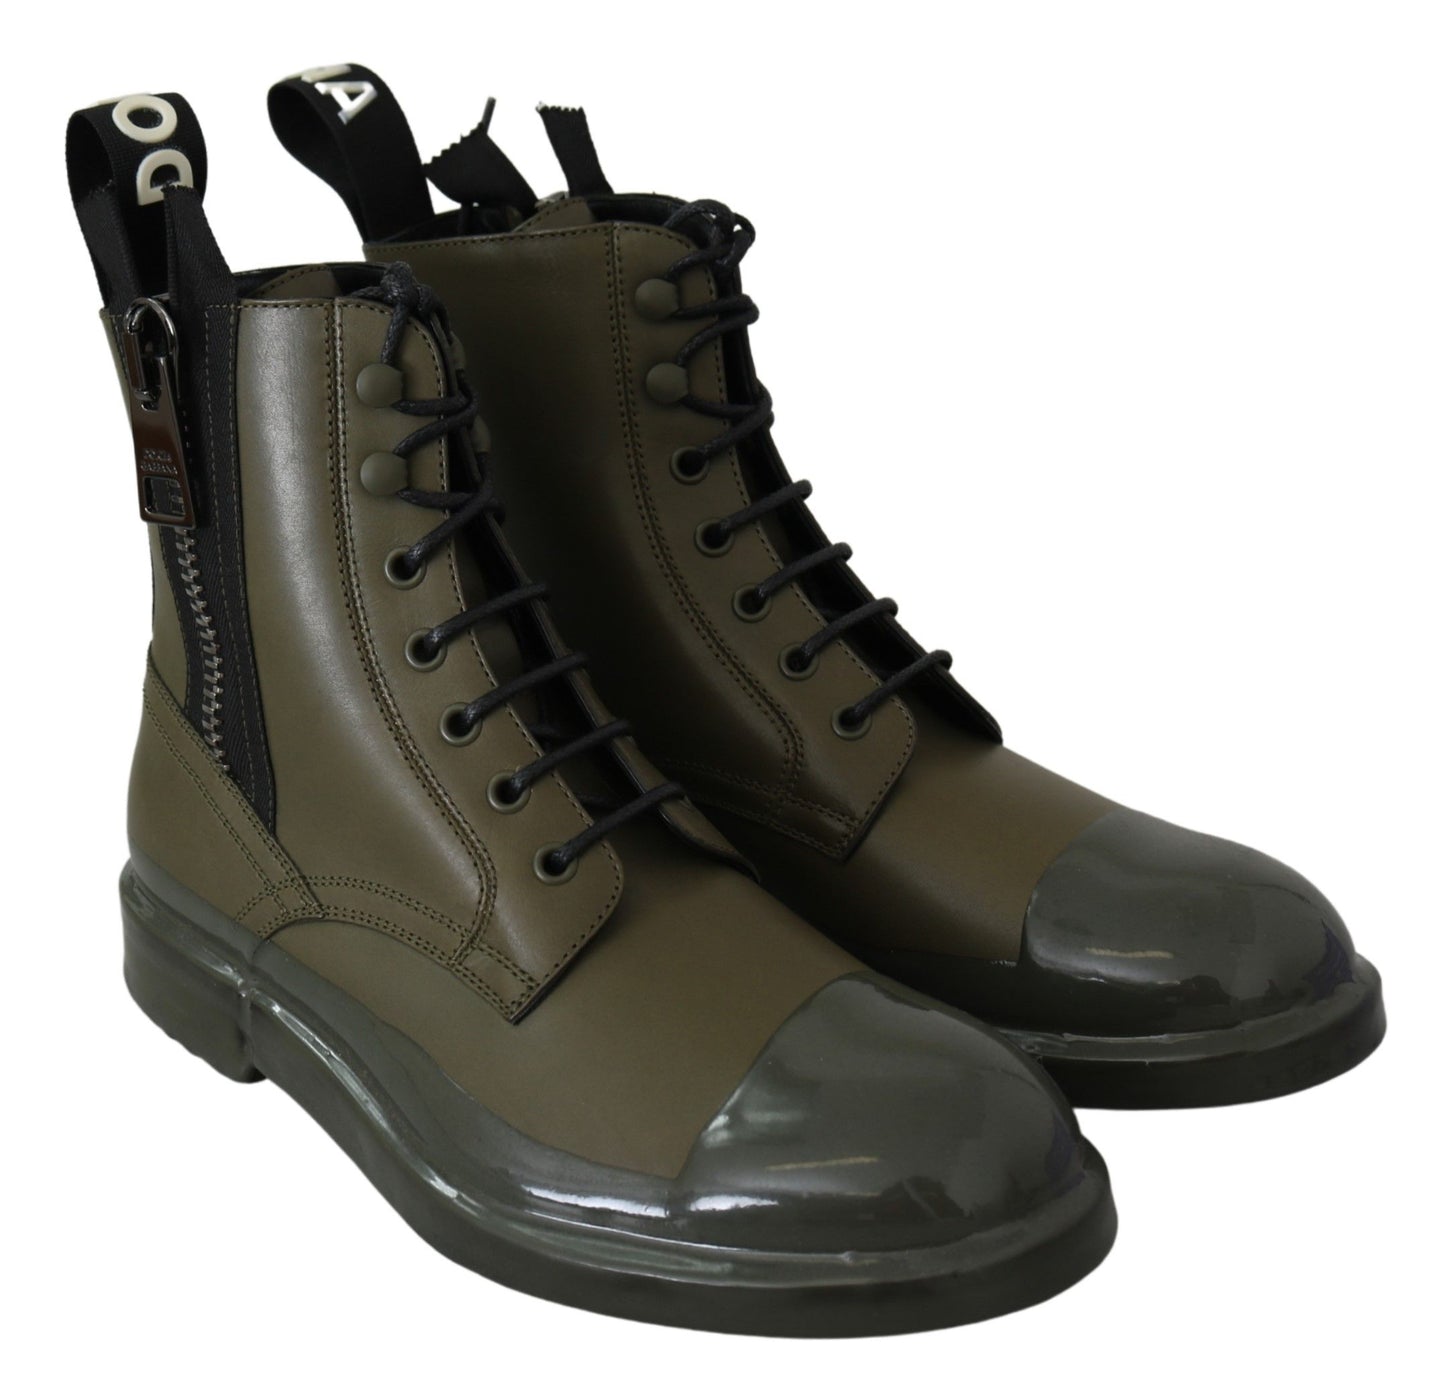 Dolce & Gabbana Chic Military Green Leather Ankle Boots